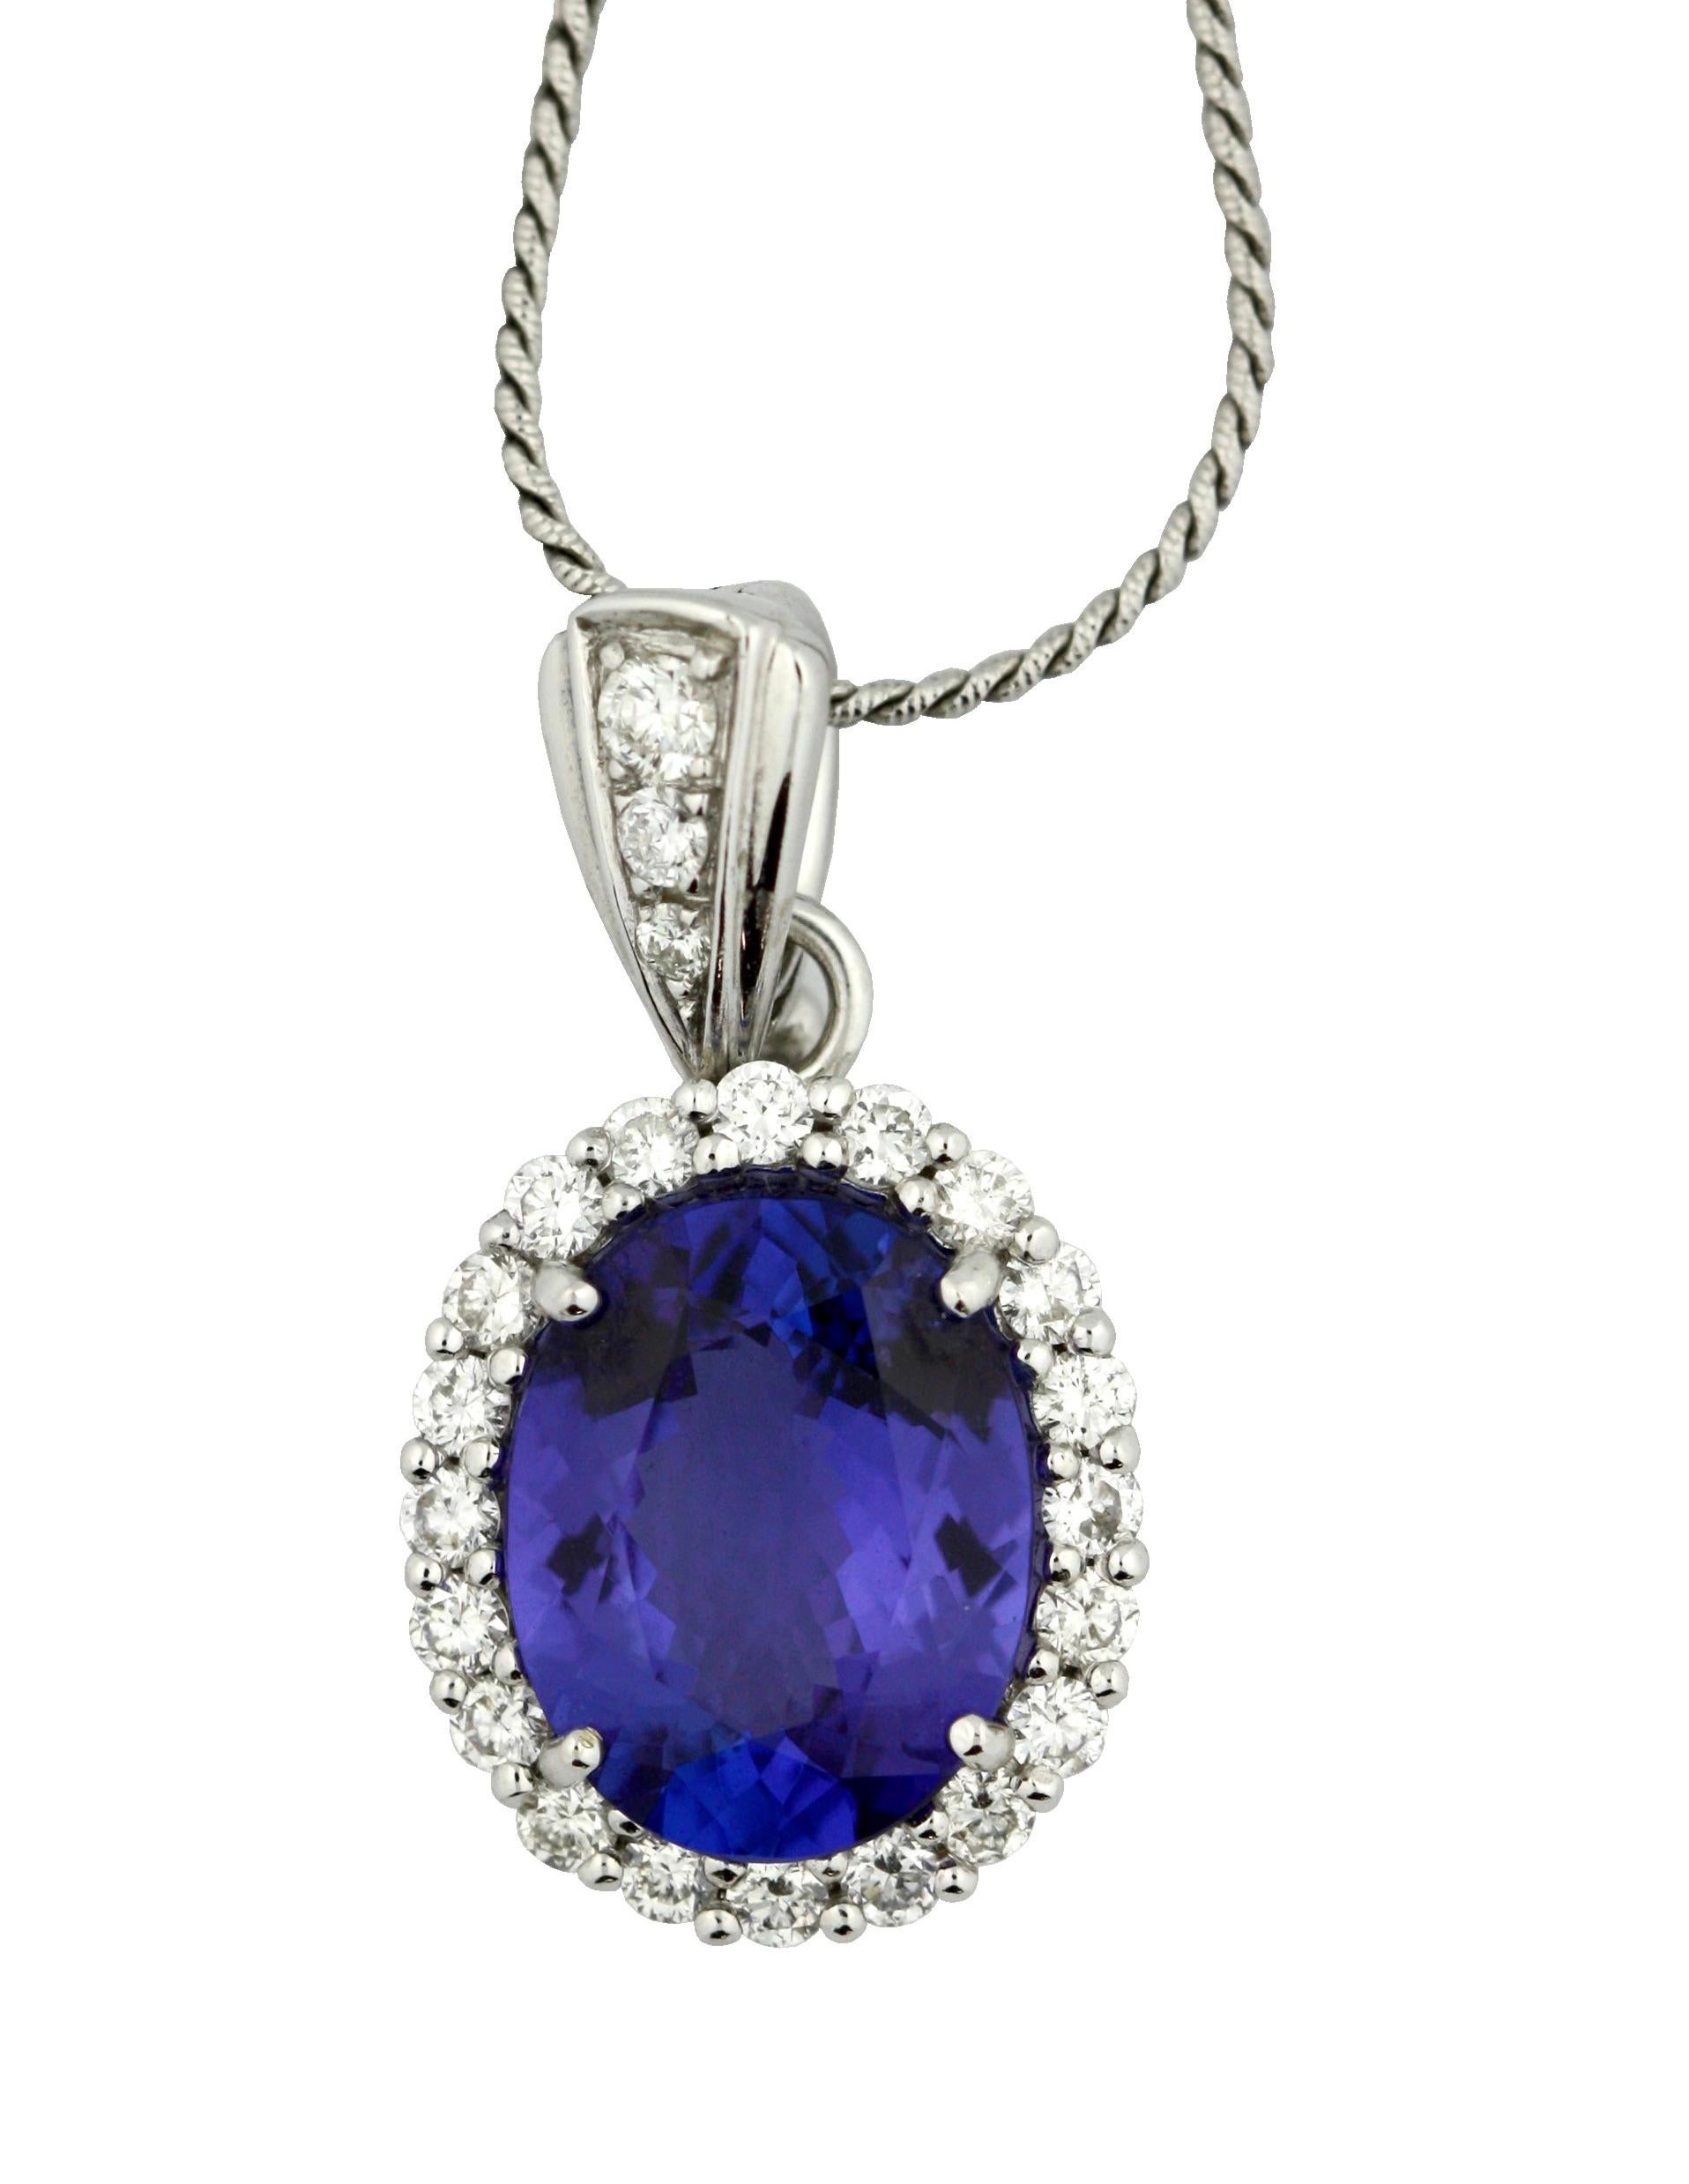 TANZANITE AND DIAMOND PENDANT
The 18 karat white gold pendant set with a oval-shaped tanzanite weighing approximately 4.06 carats, the surmount set with brilliant-cut diamonds, to a fine chain necklace, length approximately 8 inches.